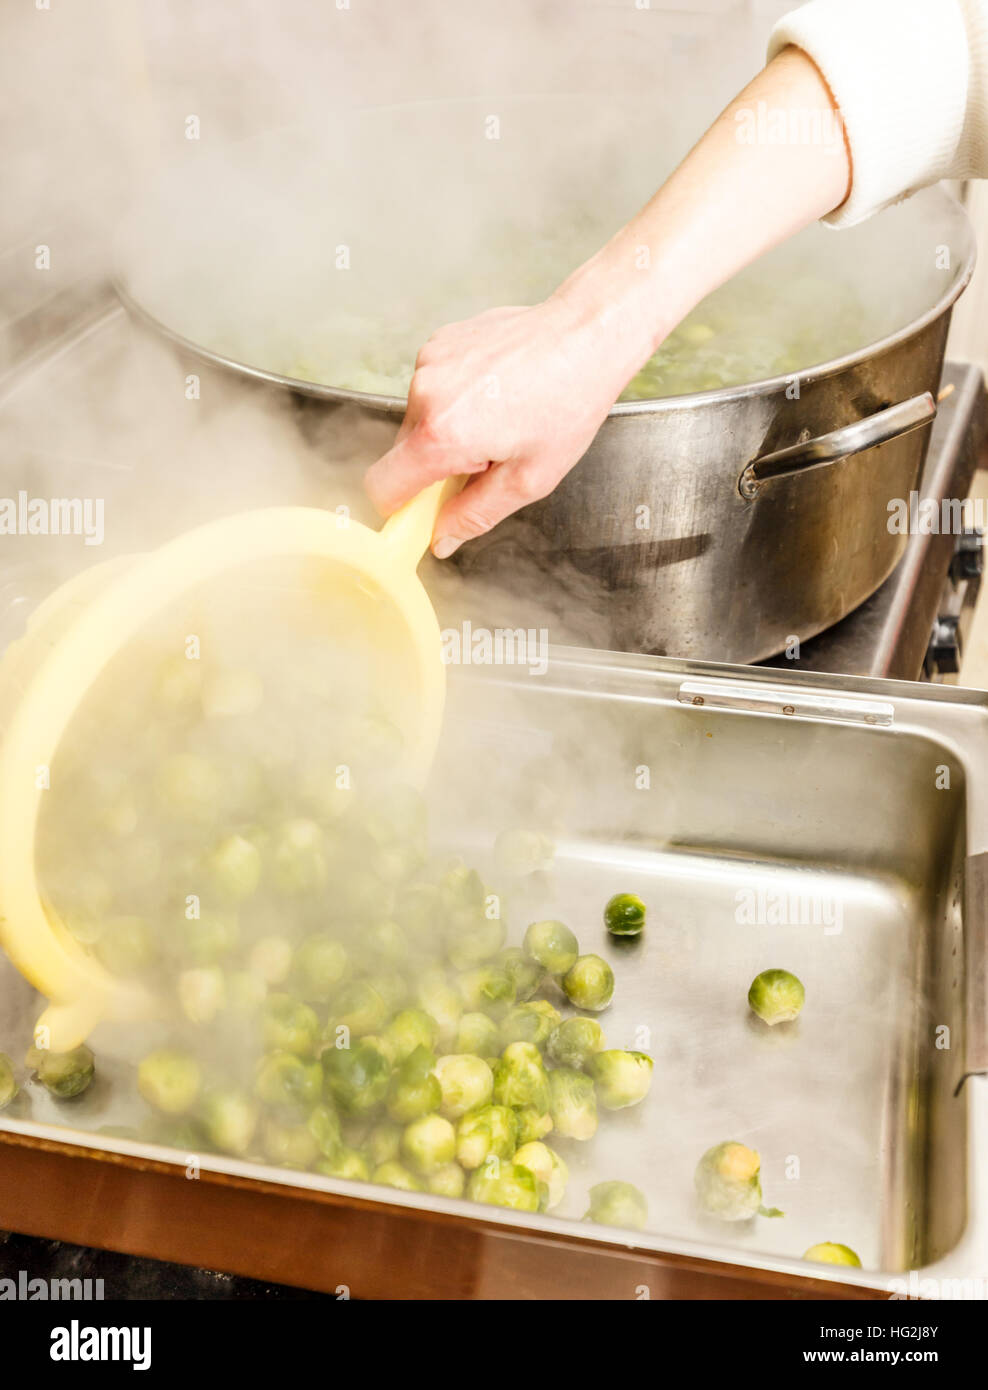 Fried brussel sprouts, cooking progress in restaurant kitchen Stock Photo